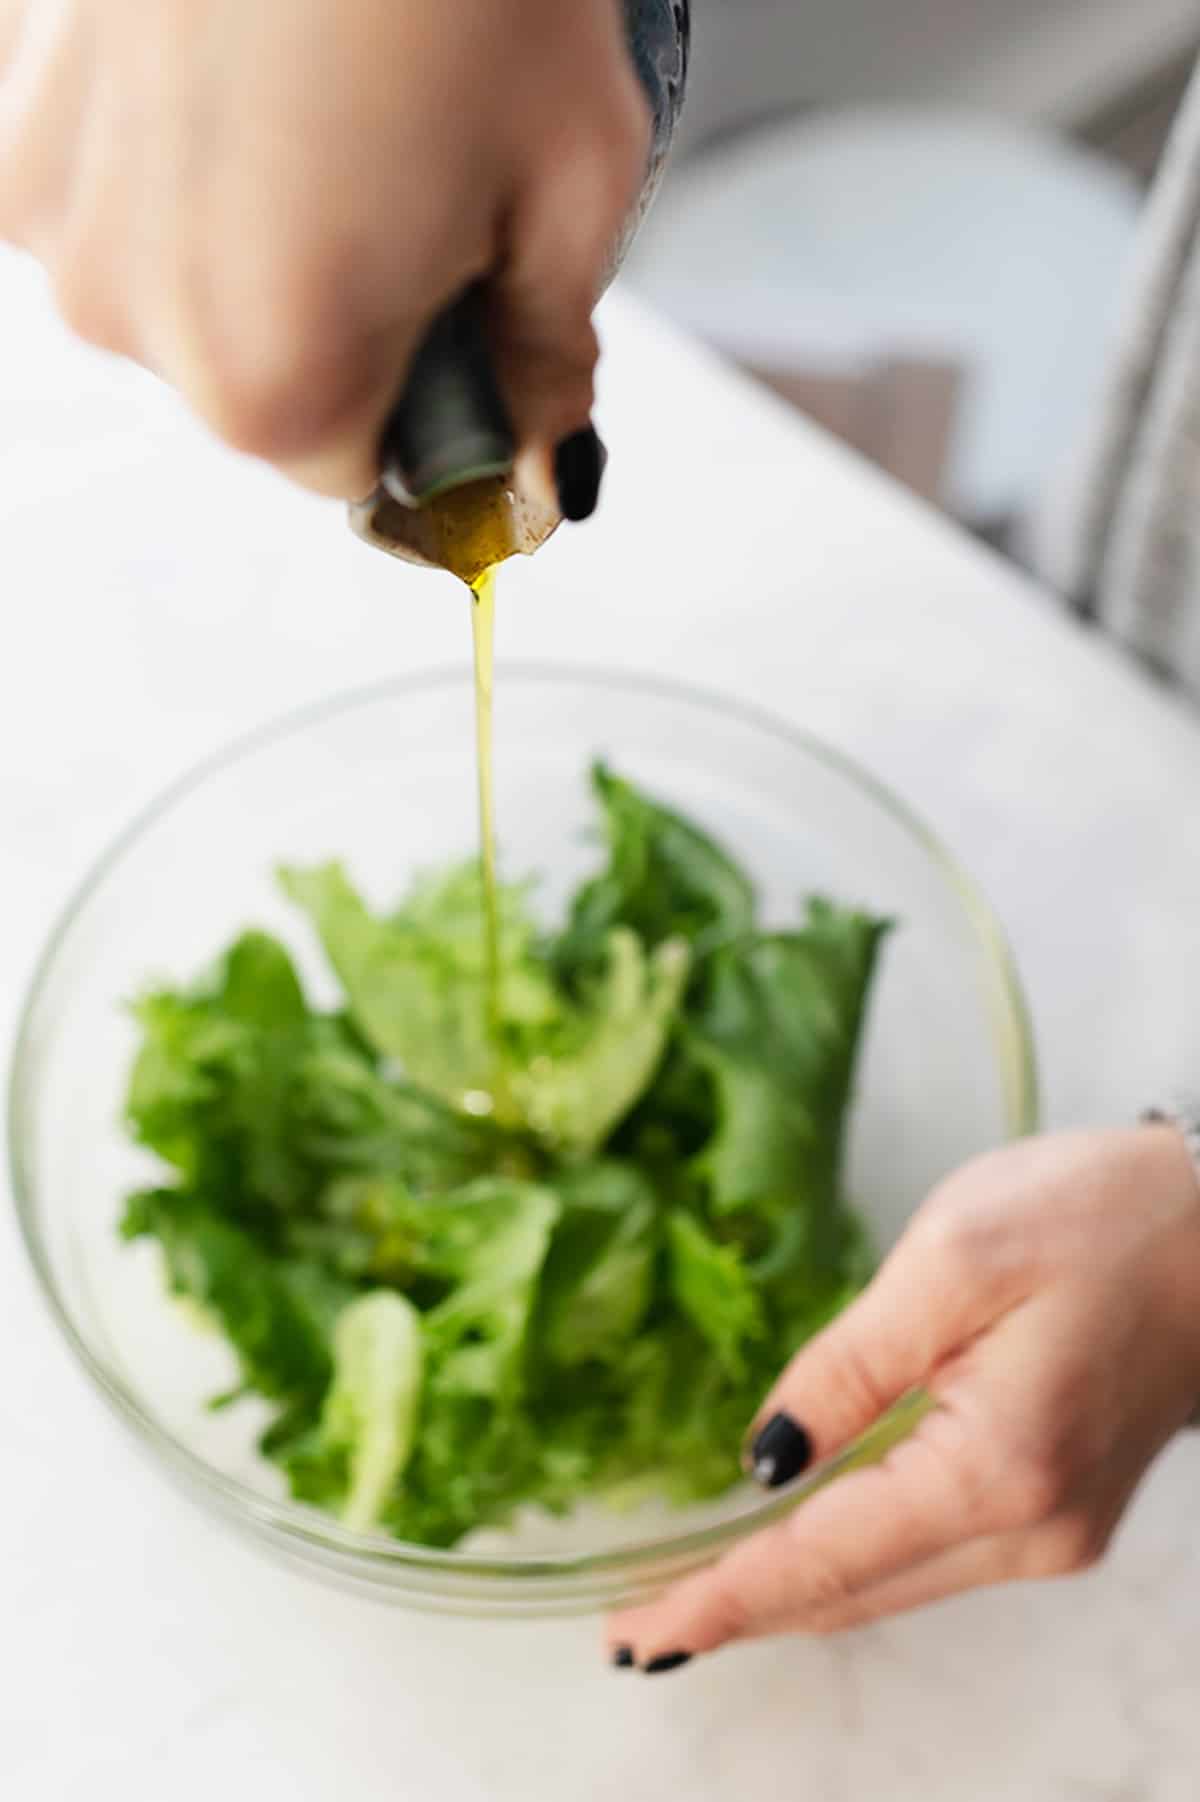 A bottle of olive oil being poured into a salad.